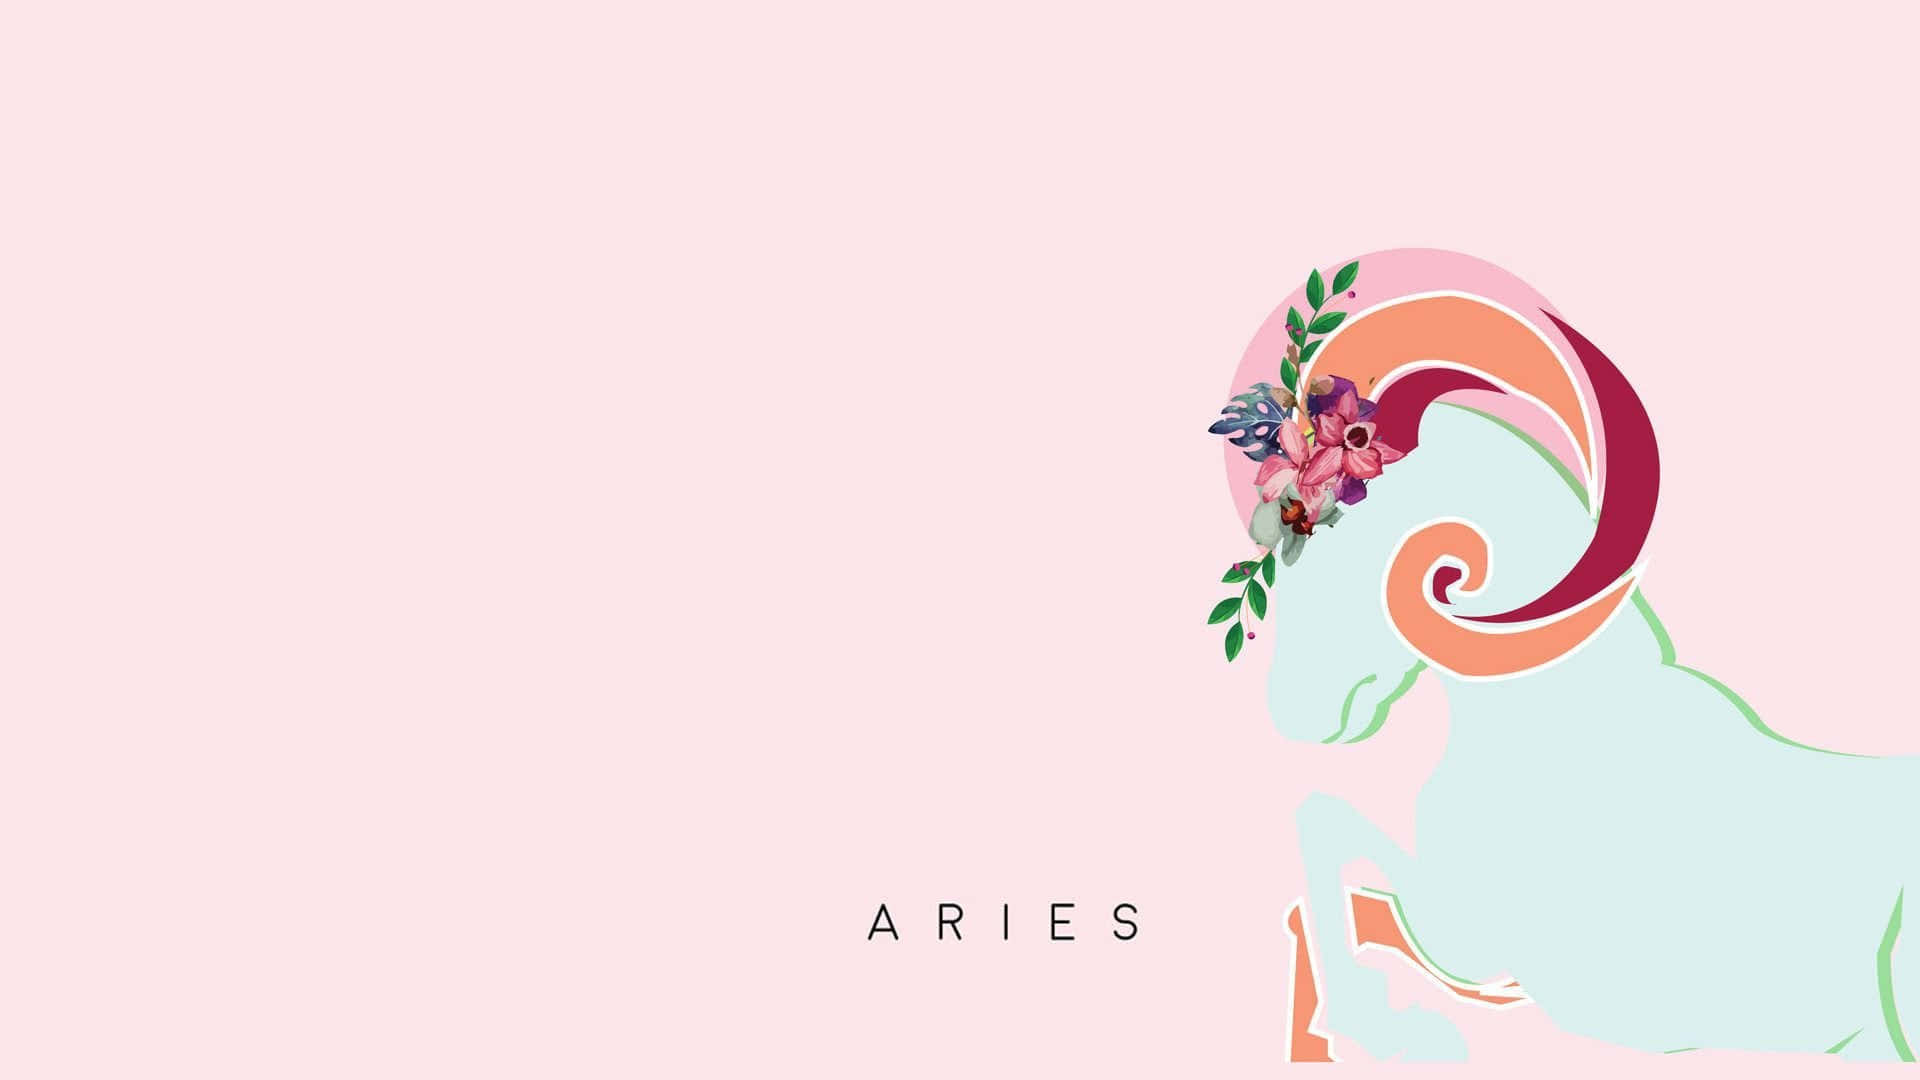 The Bold and Fearless Aries"